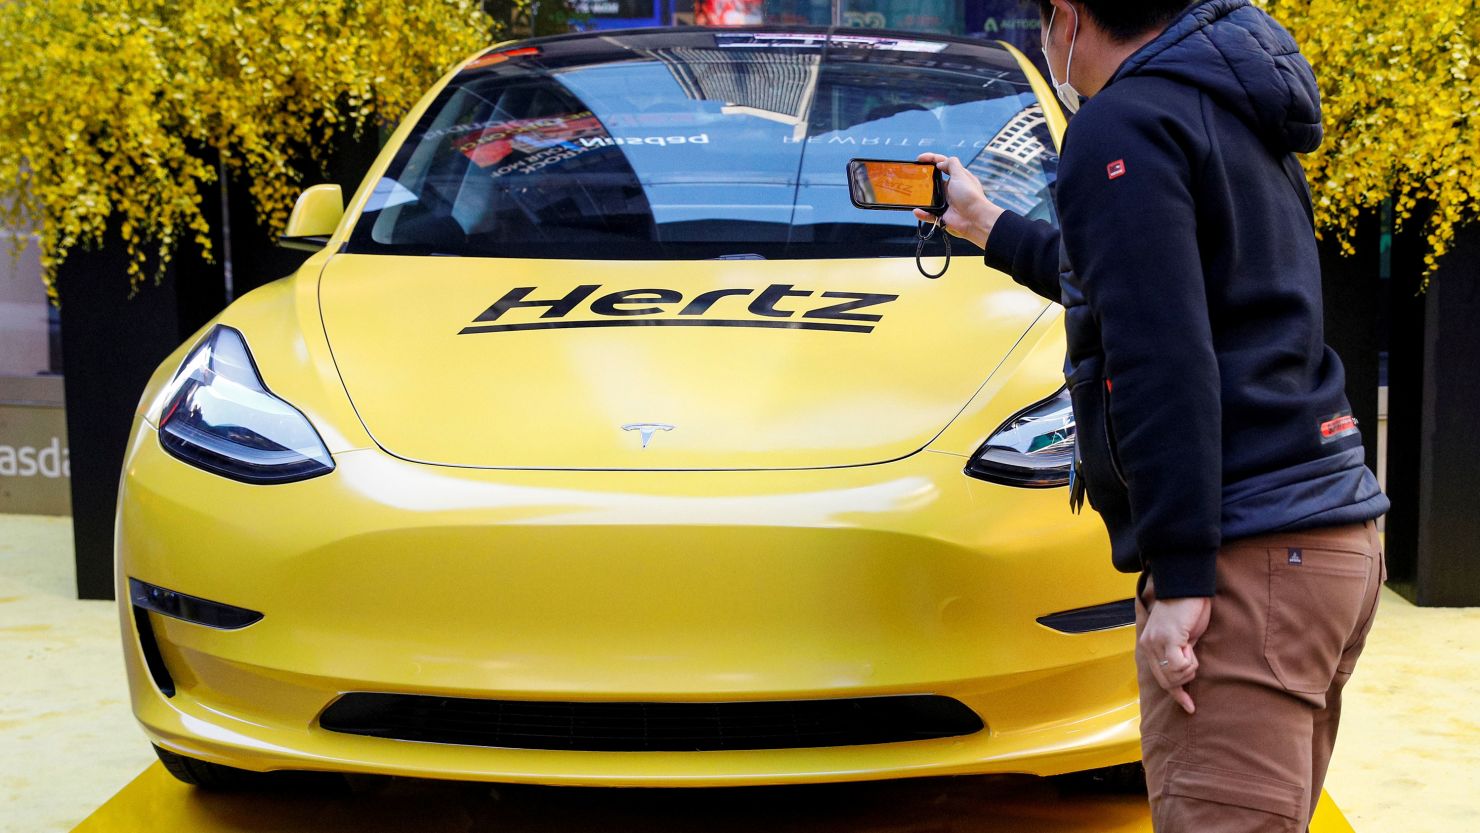 A man photographs a Hertz Tesla electric vehicle displayed during the Hertz Corporation IPO at the Nasdaq Market site in Times Square in New York City, U.S., November 9, 2021. REUTERS/Brendan McDermid